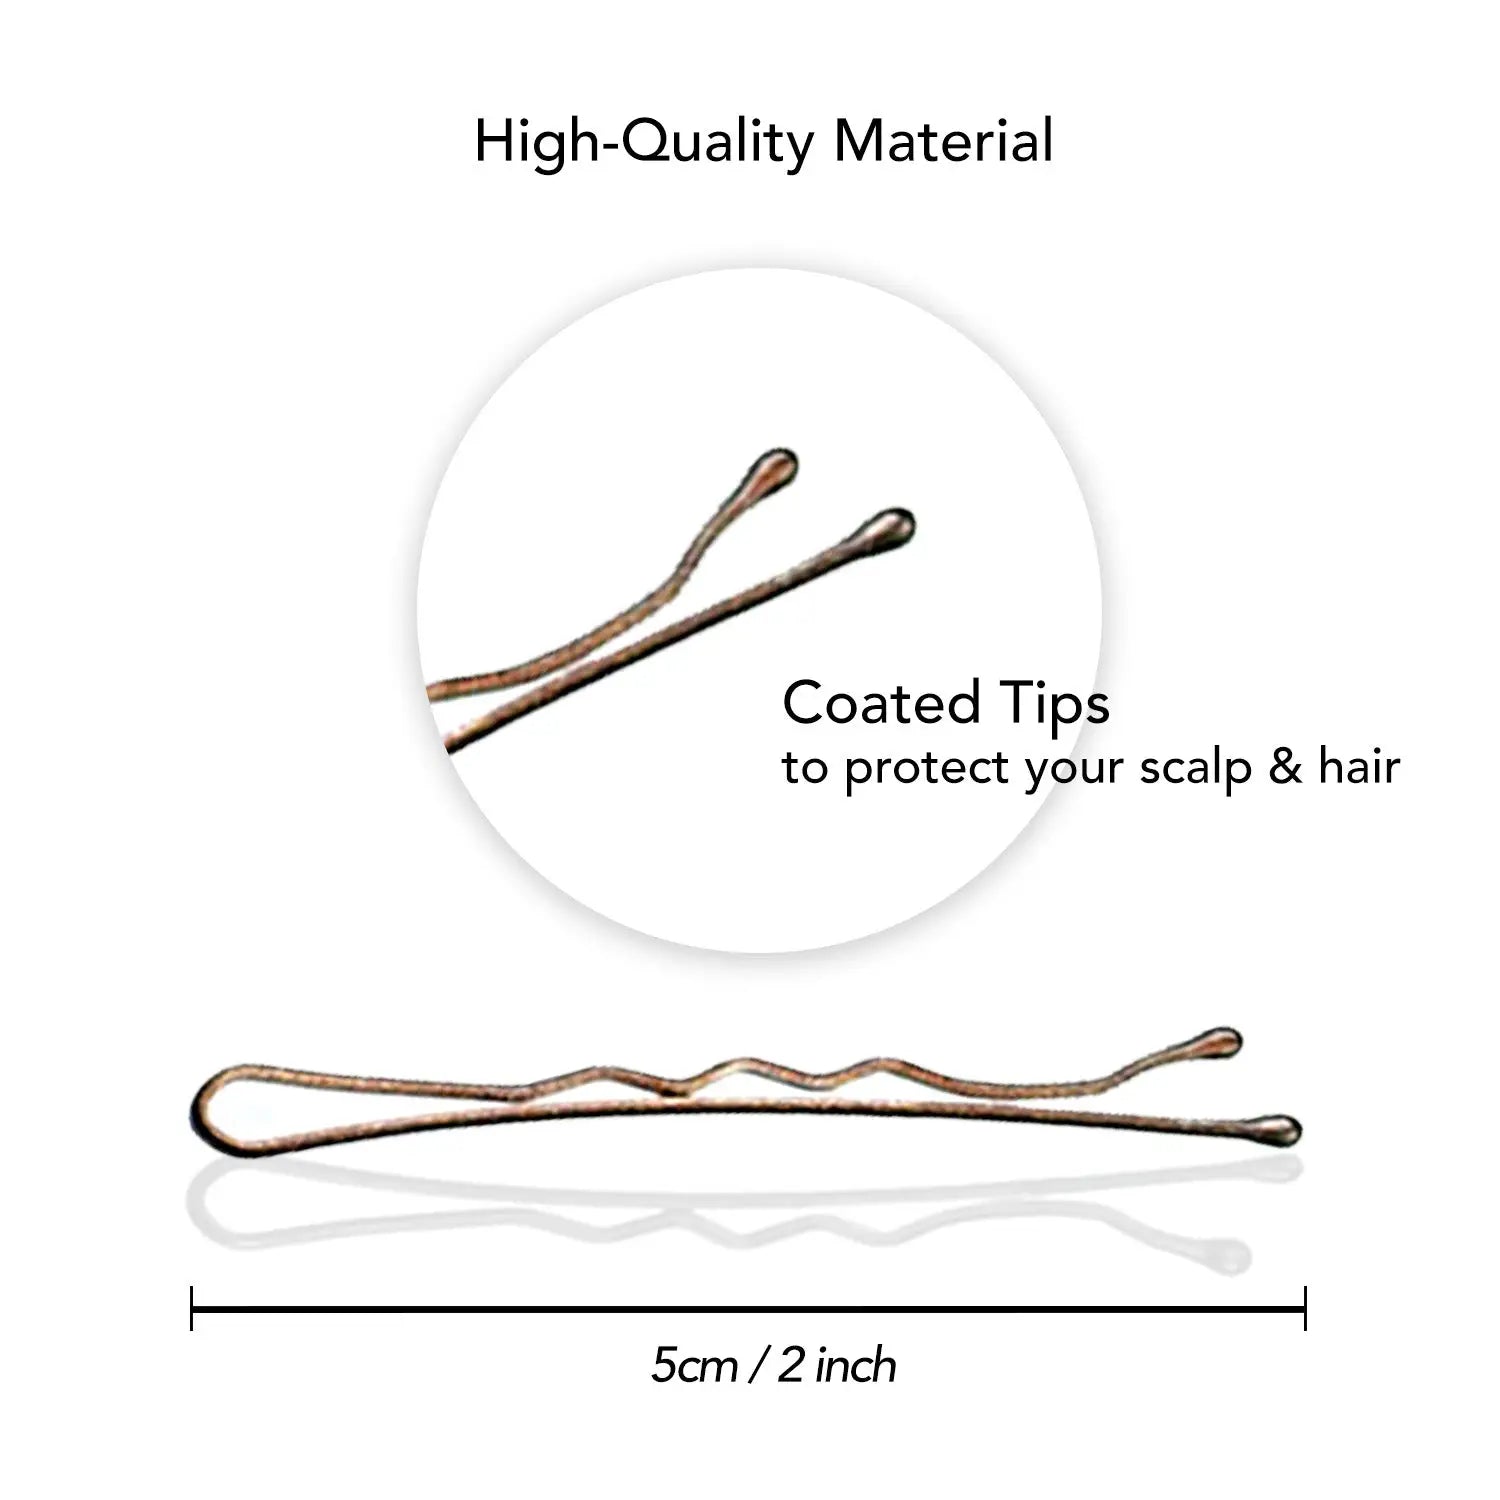 Metal Bobby Hair Pins featuring high quality copper wire.